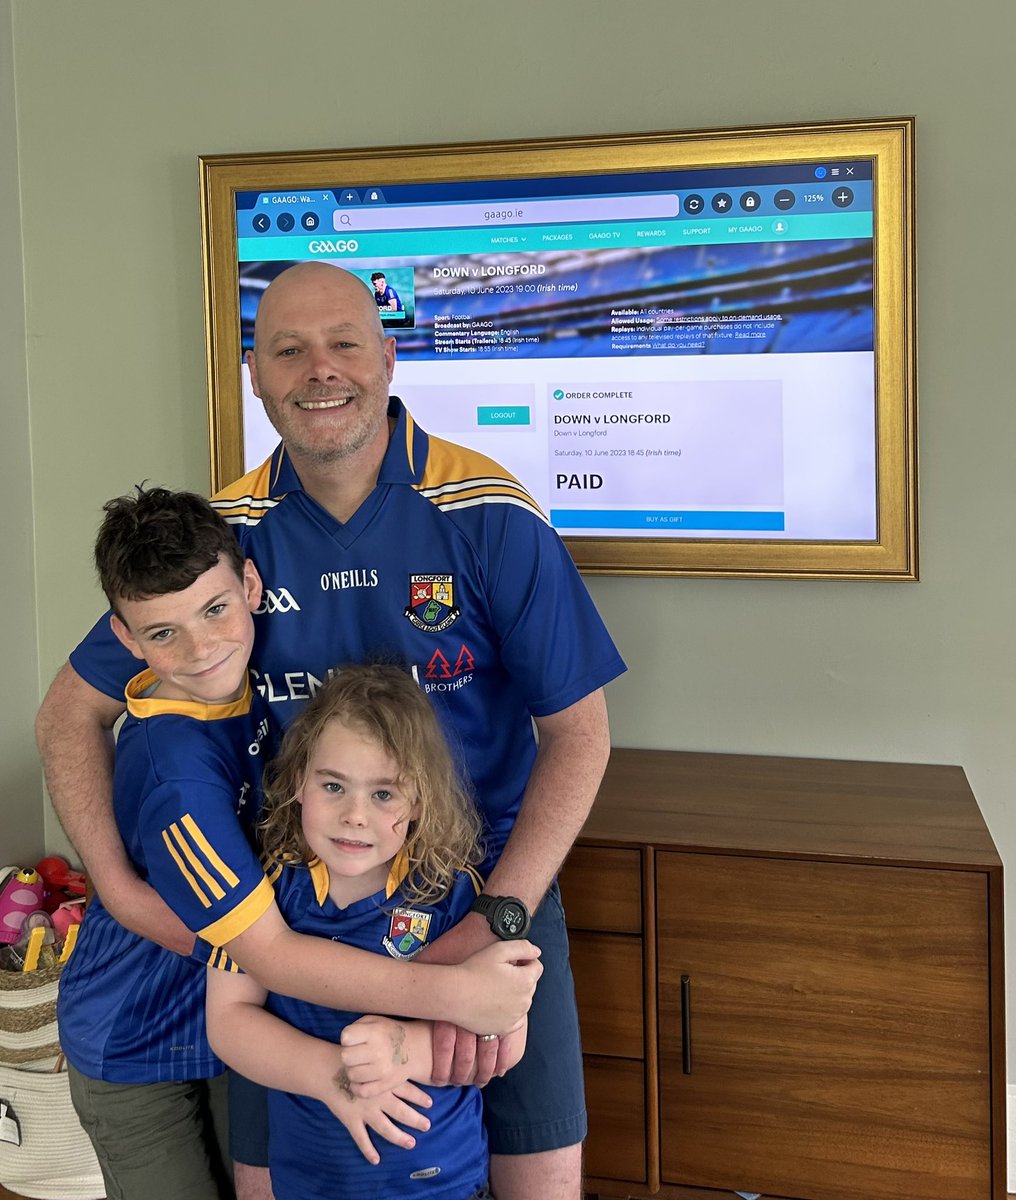 @GAAGO Everyone in the Connell household in Andover, Massachusetts is  ready for Longford V Down.